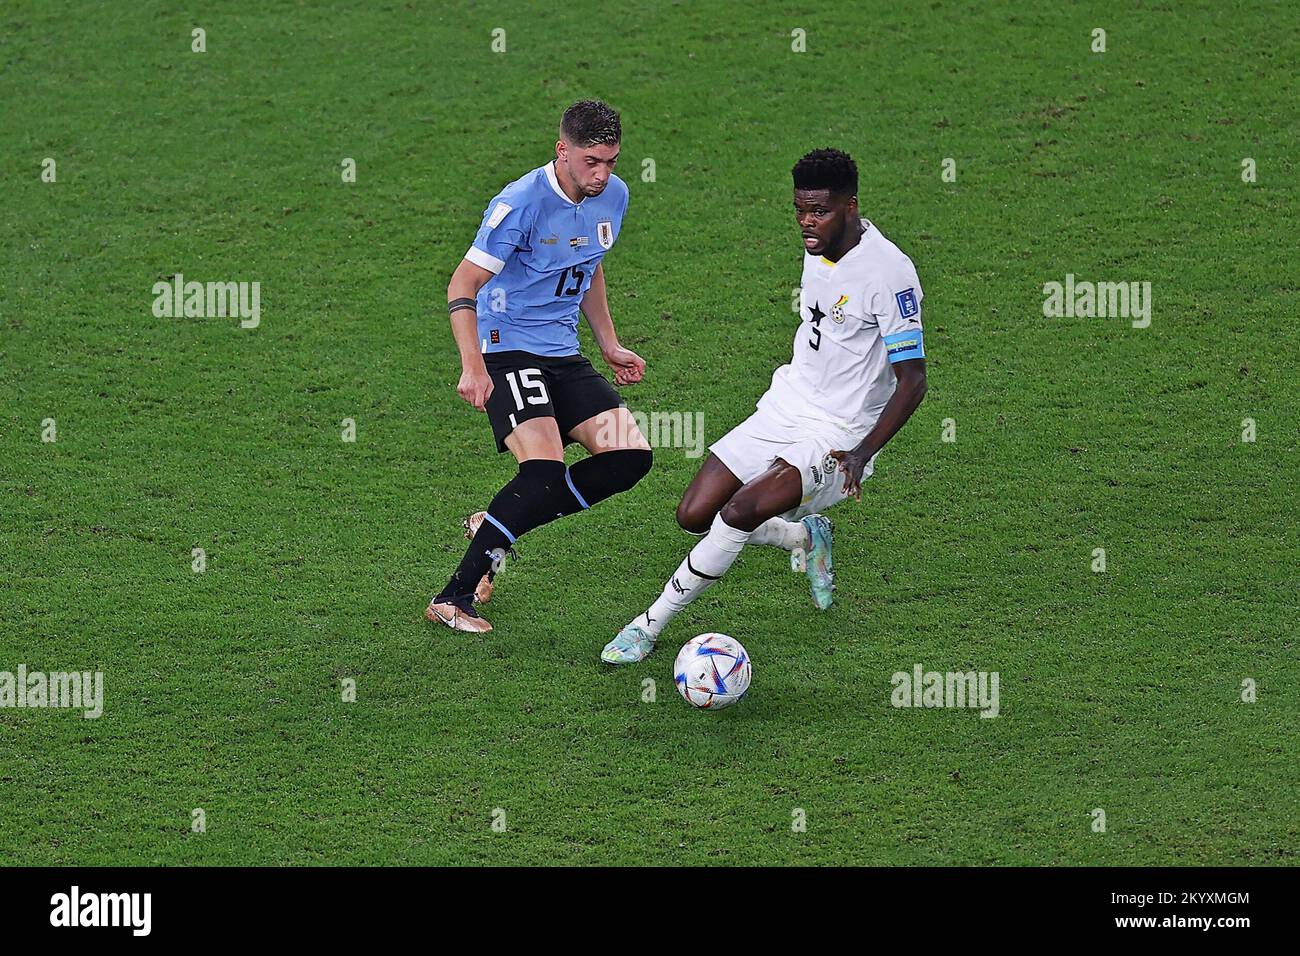 Doha, Qatar. 02nd Dec, 2022. Thomas Partey of Ghana competes with Federico Valverde of Uruguay, during the match between Ghana and Uruguay, for the 3rd round of Group H of the FIFA World Cup Qatar 2022, Al Janoub Stadium this Friday 02. 30761 (Heuler Andrey/SPP) Credit: SPP Sport Press Photo. /Alamy Live News Stock Photo